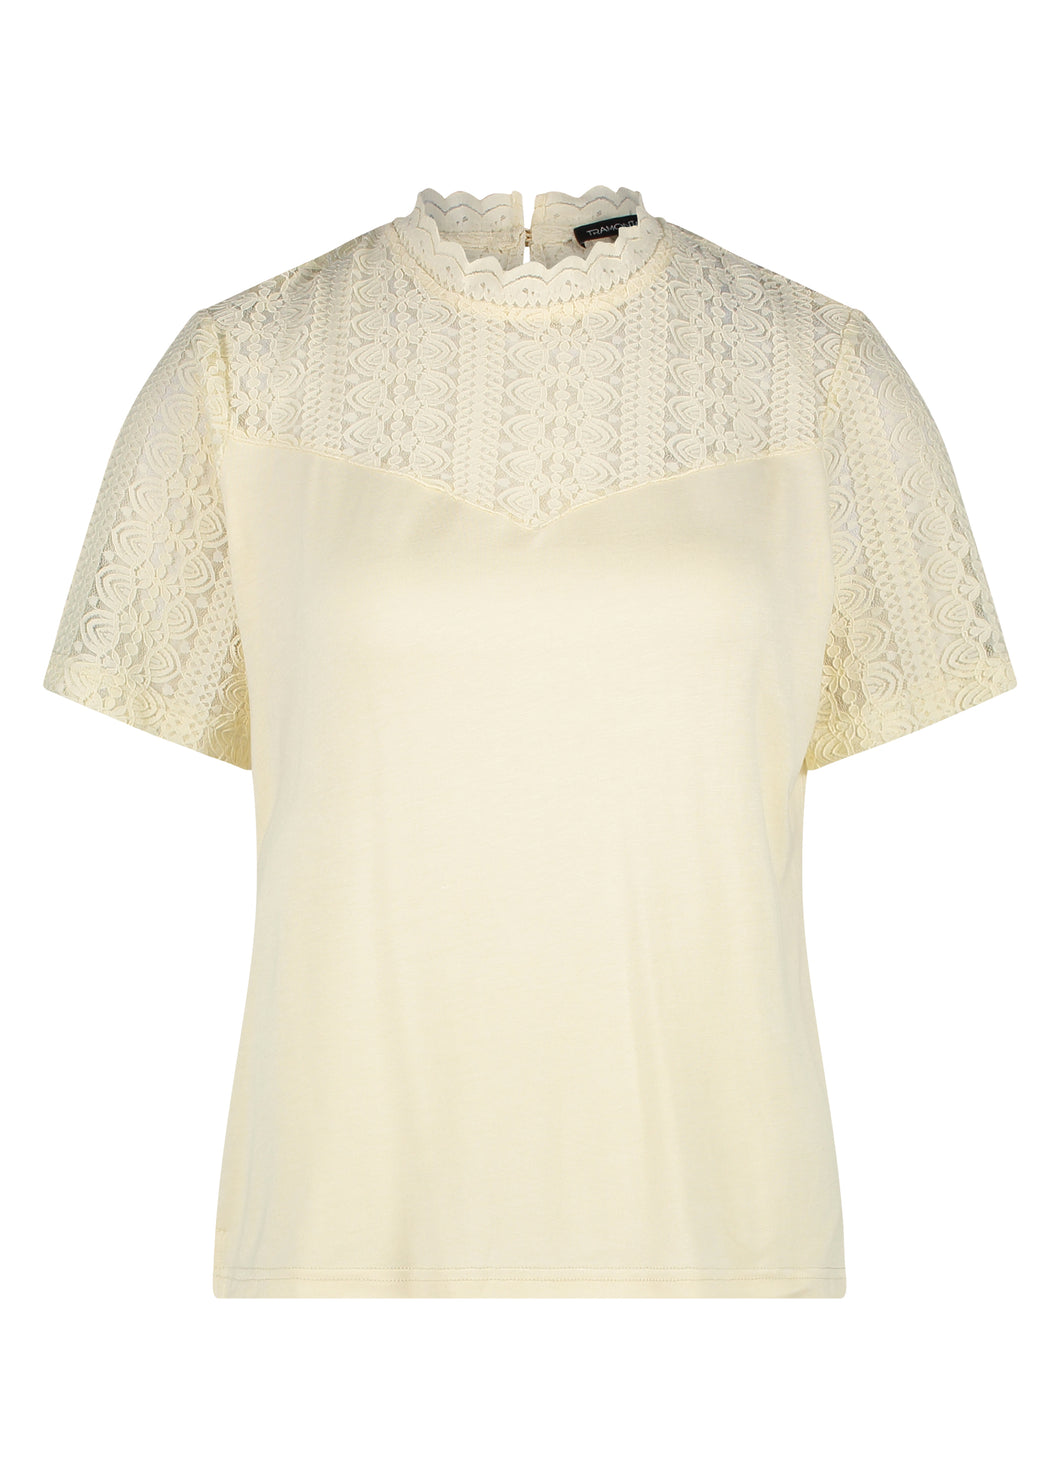 TRAMONTANA TOP S/S LACE DETAILS cream